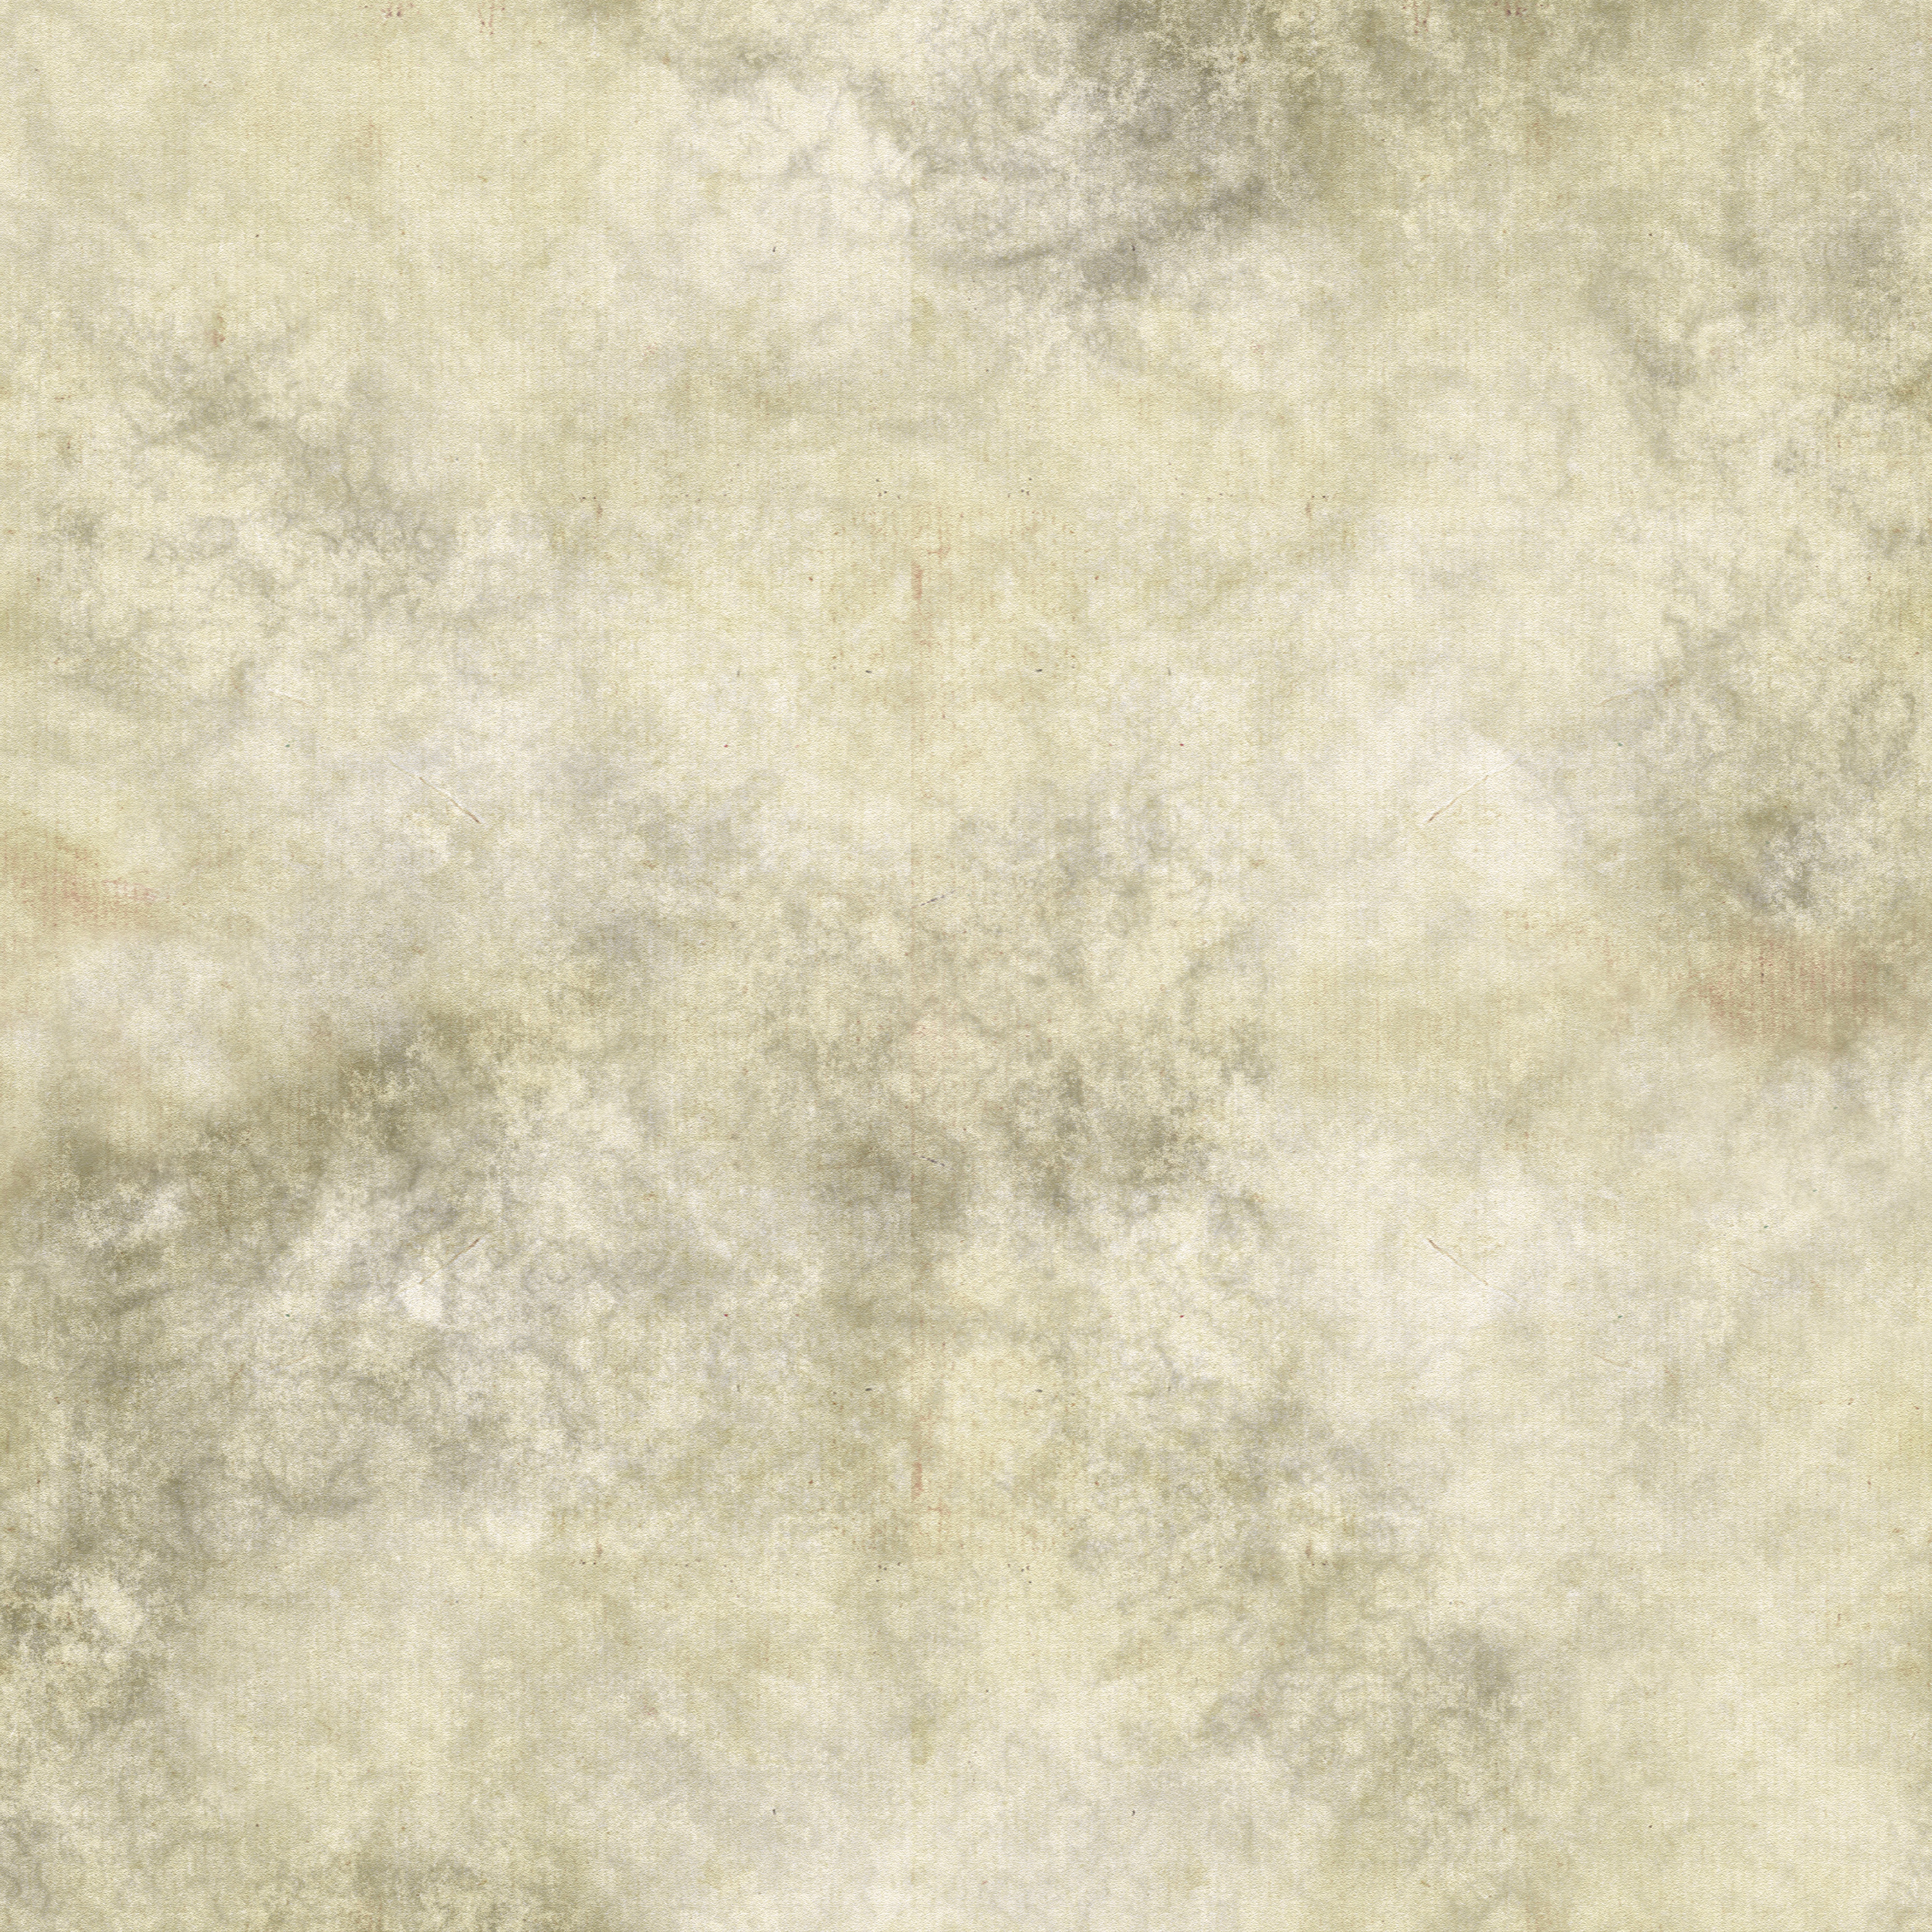 some old gray worn paper background | www.myfreetextures.com | Free Textures, Photos ...